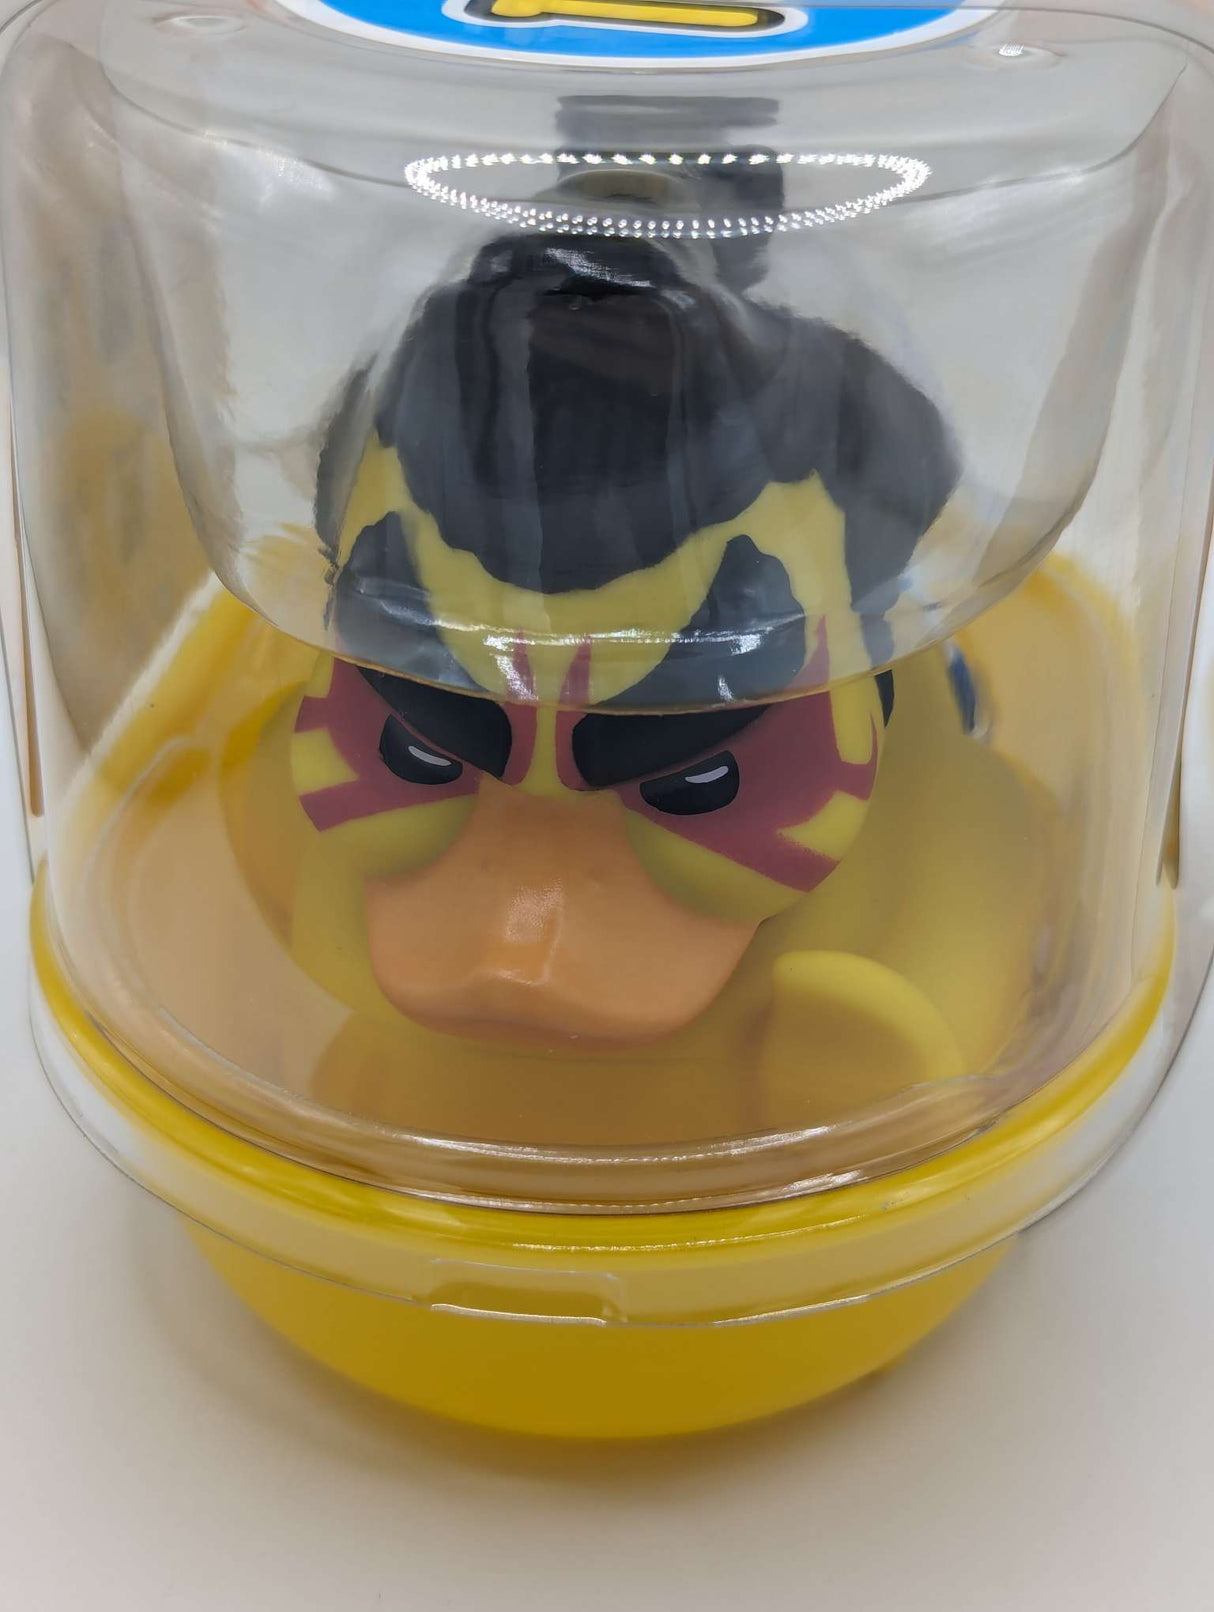 Tubbz | Street Fighter | E. Honda | Cosplaying Duck Collectible #6